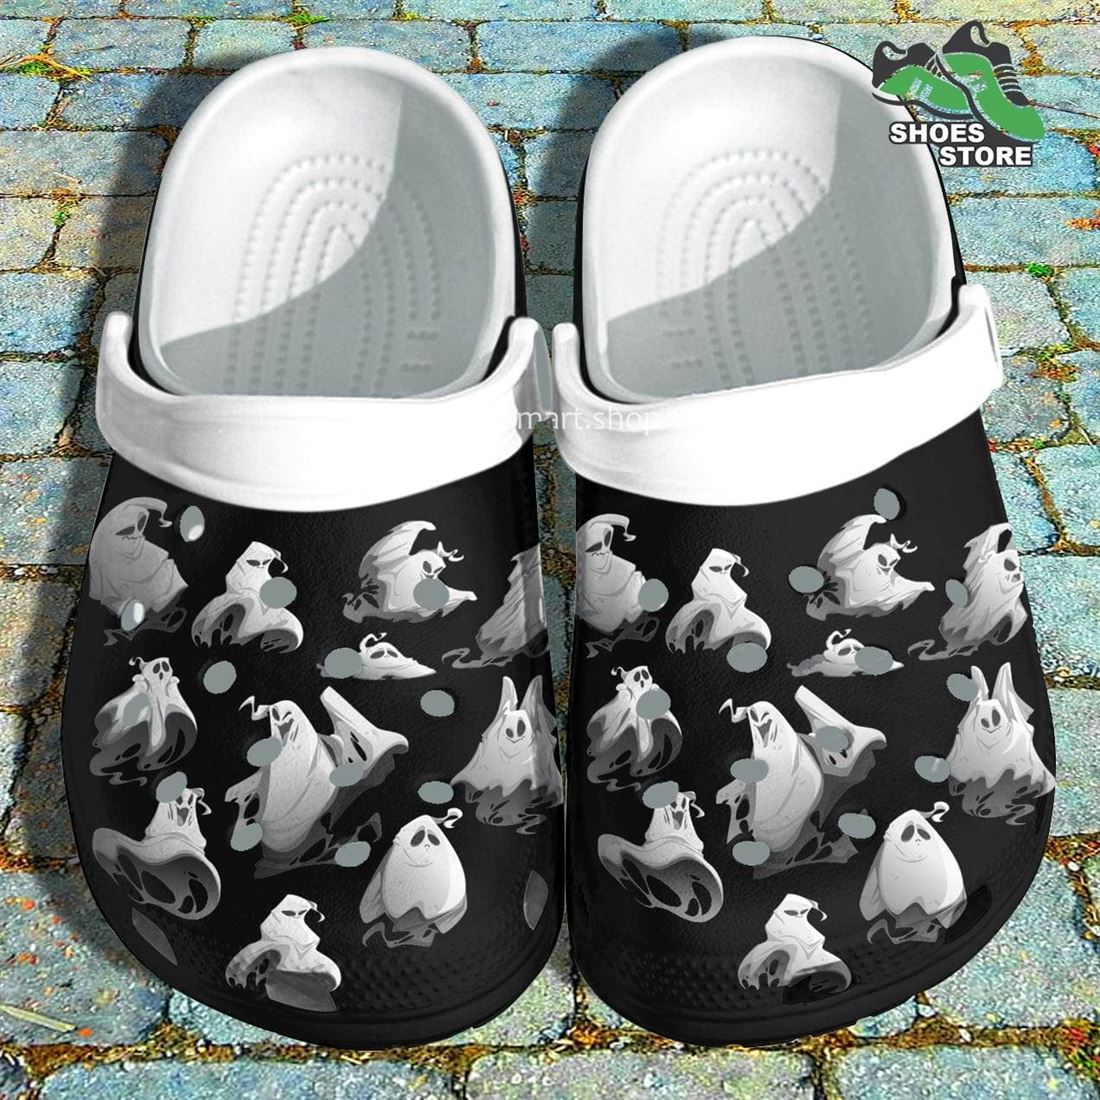 Ghost Sticker Pattern Crocs Shoes, Scary Cool Boo Crocs Shoes Brother